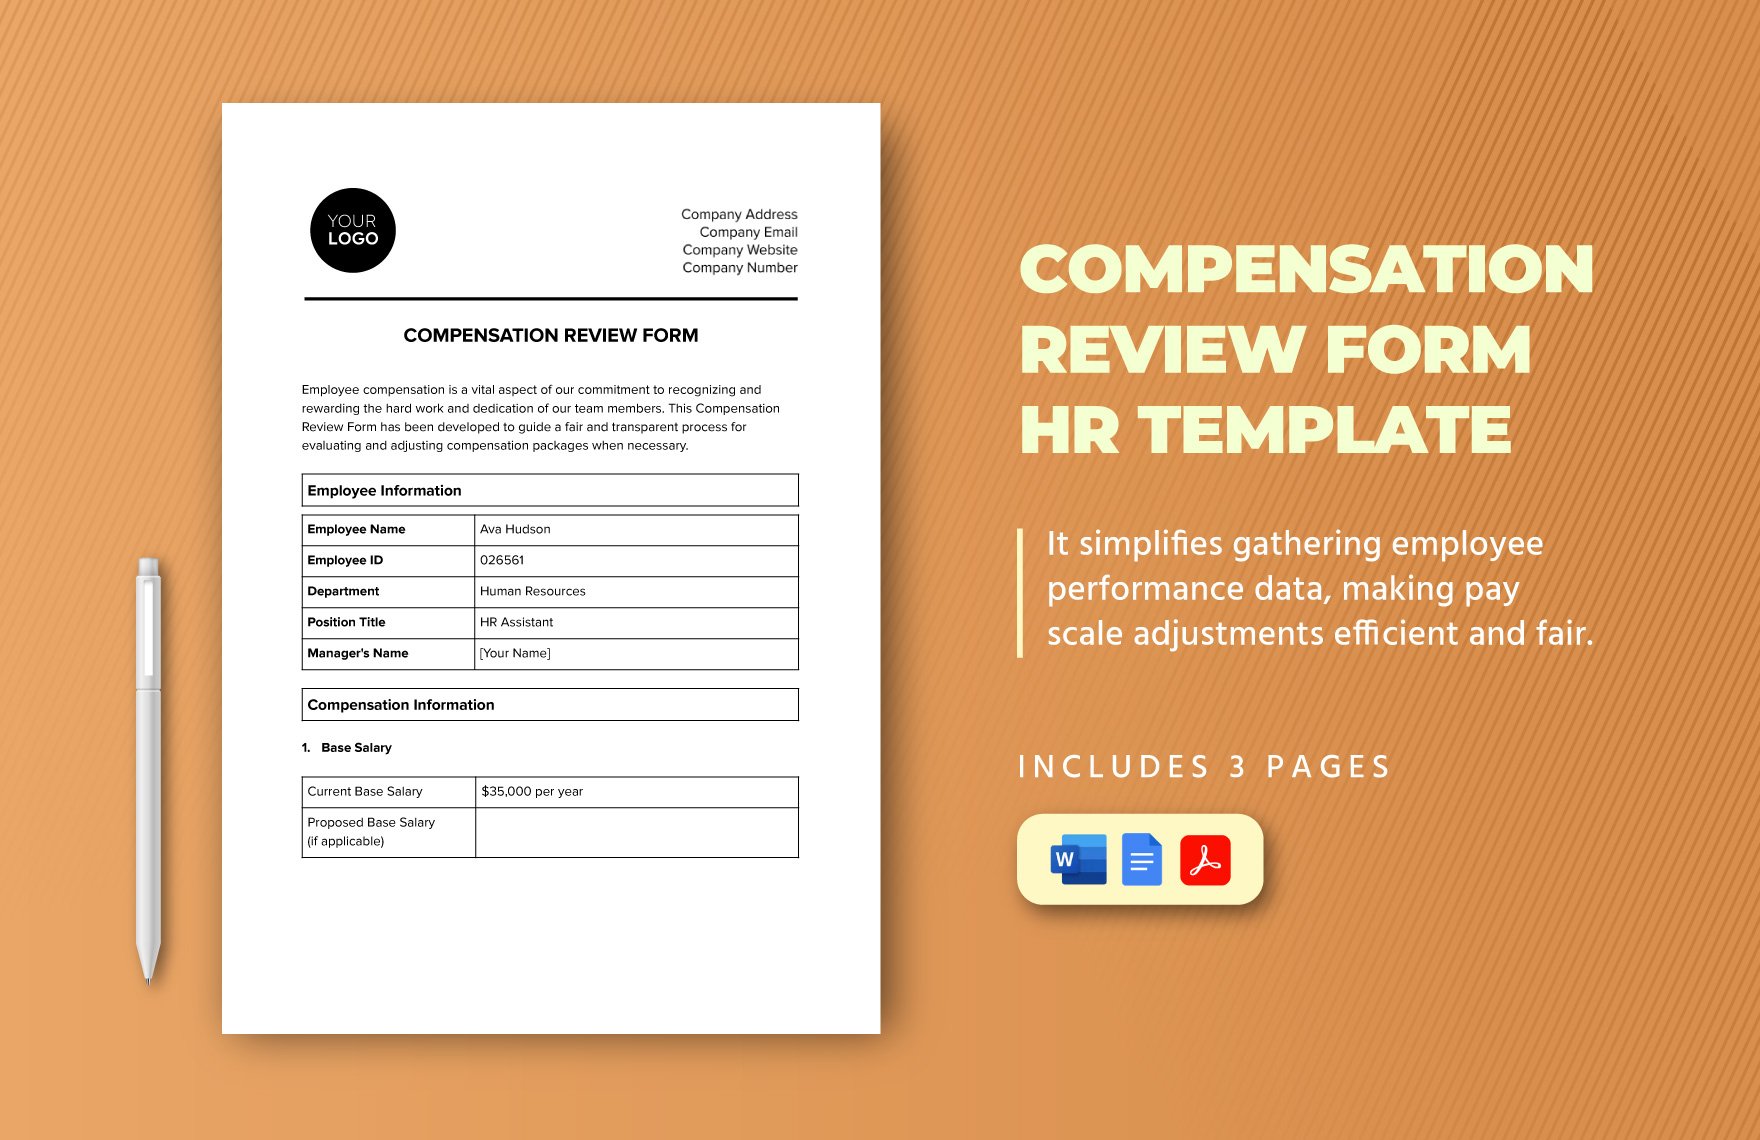 Compensation Review Form HR Template in Word, Google Docs, PDF